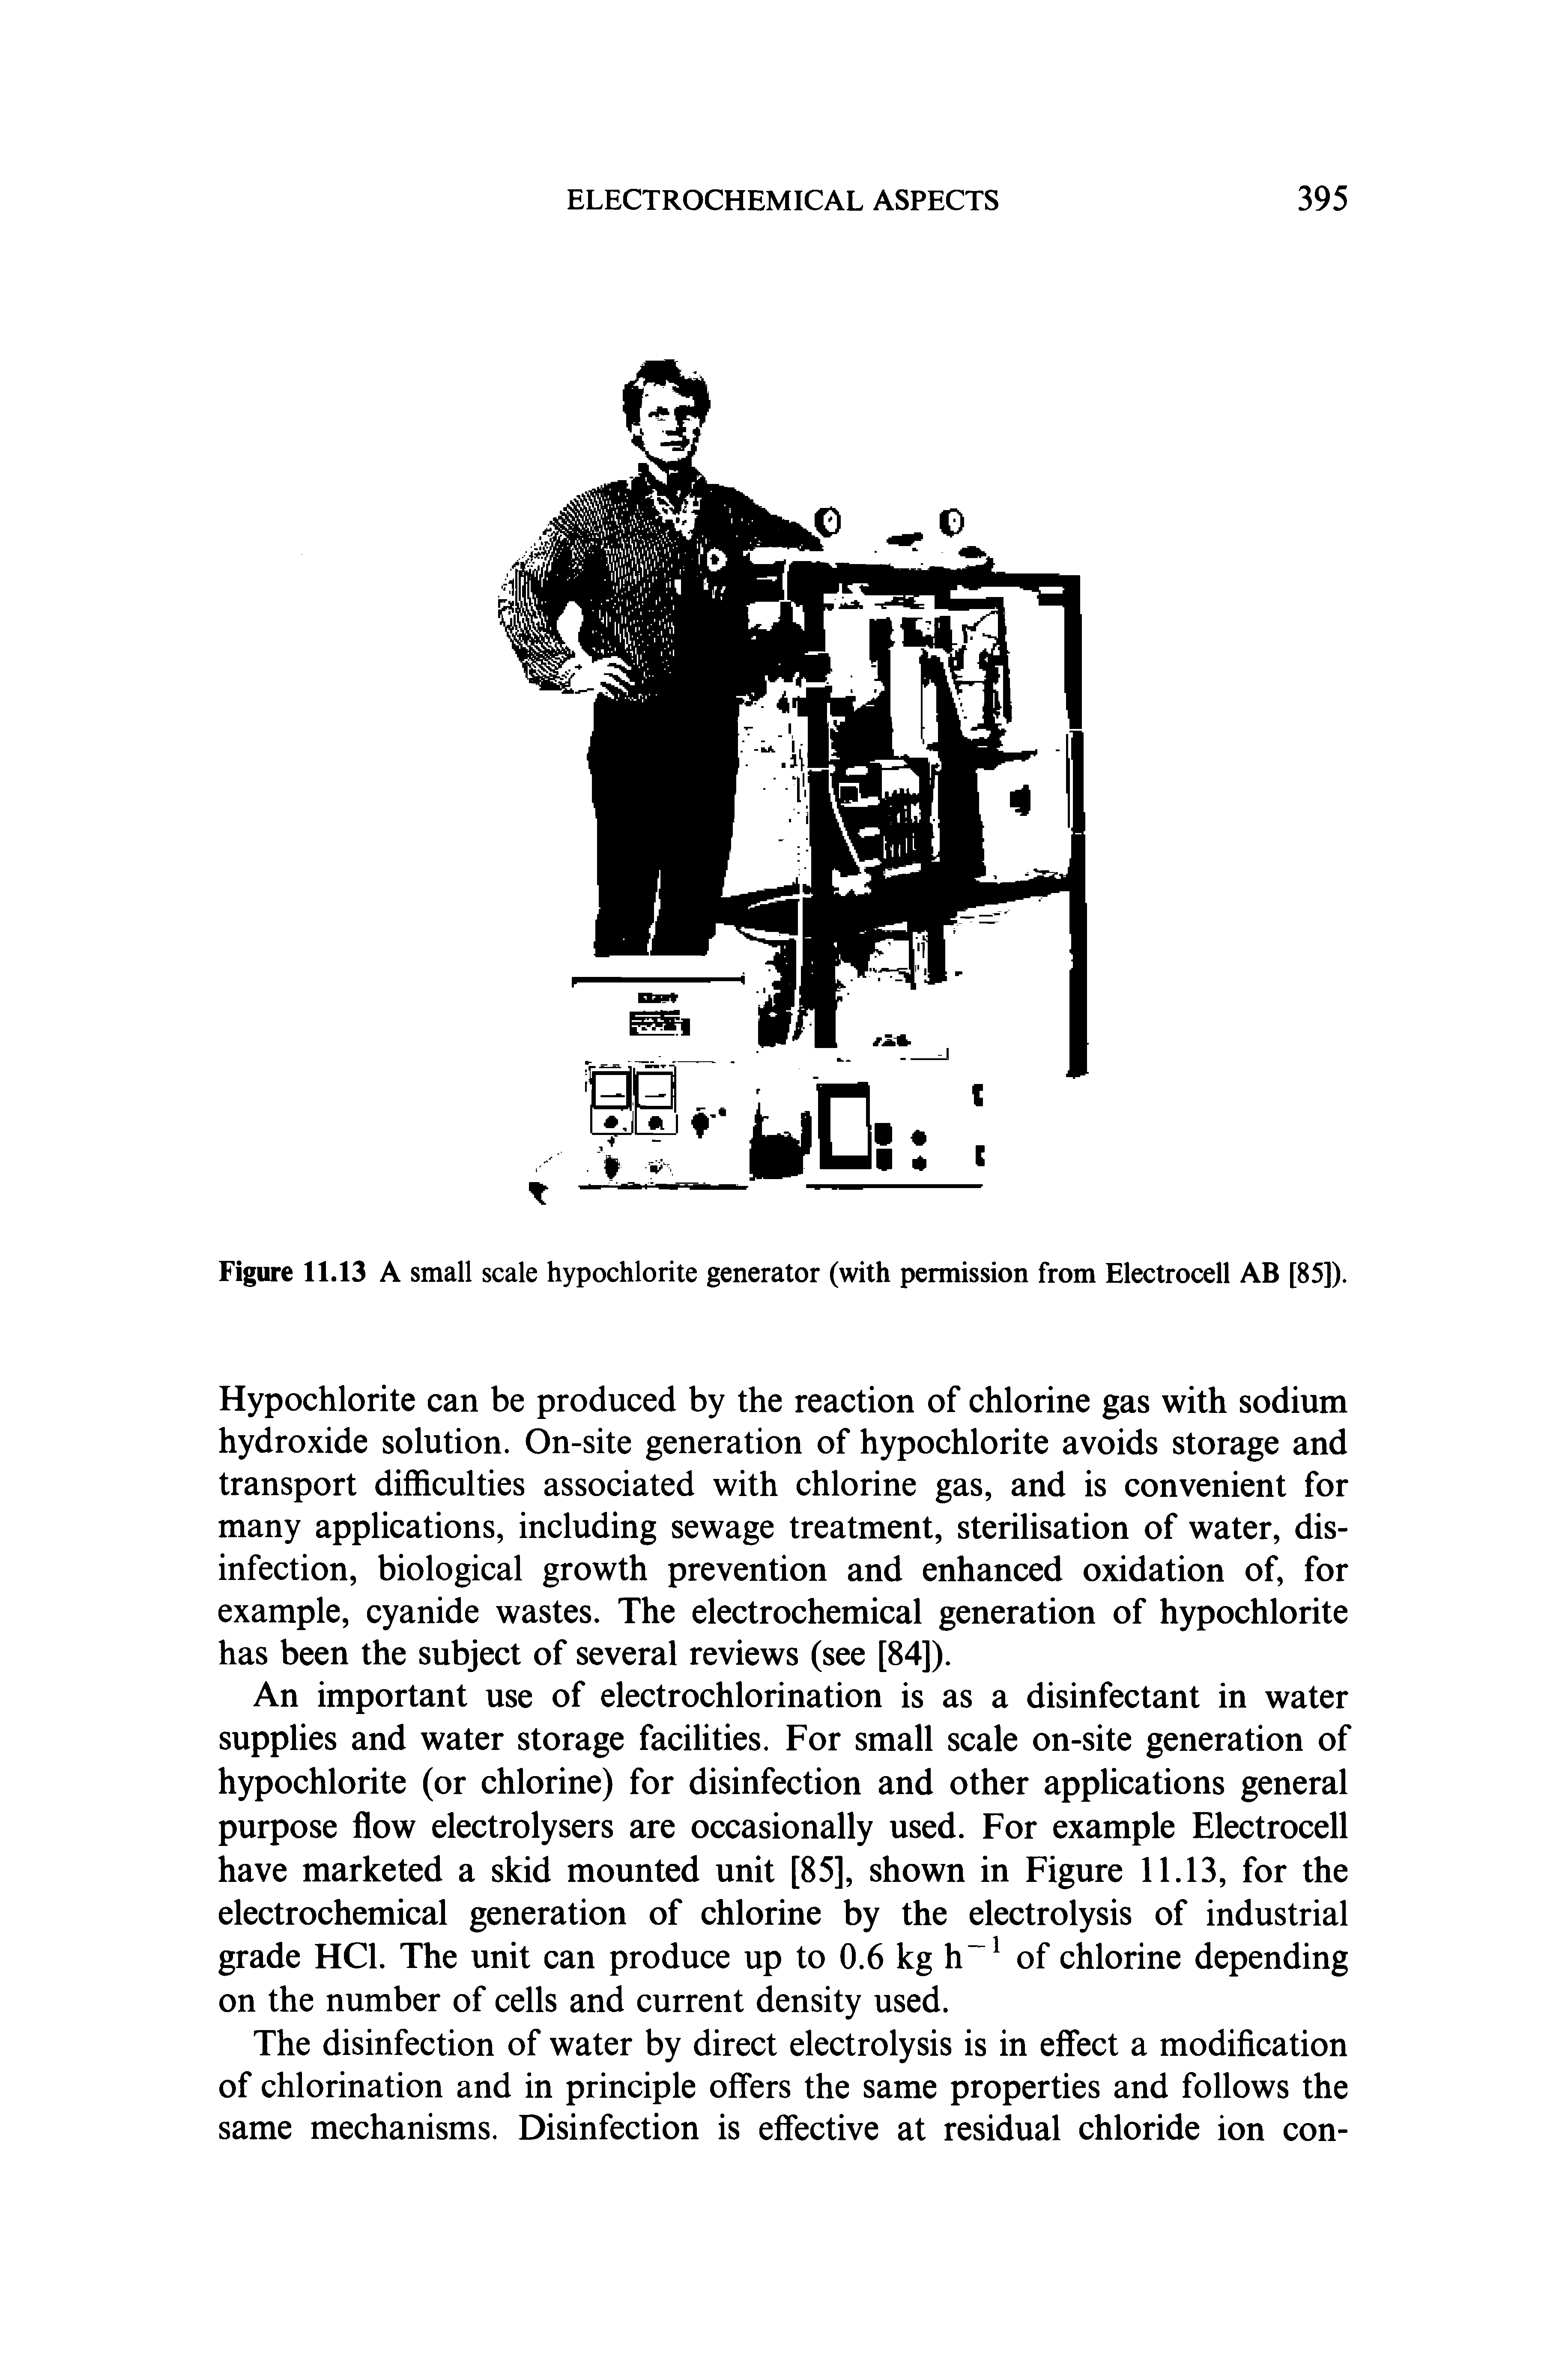 Figure 11.13 A small scale hypochlorite generator (with permission from Electrocell AB [85]).